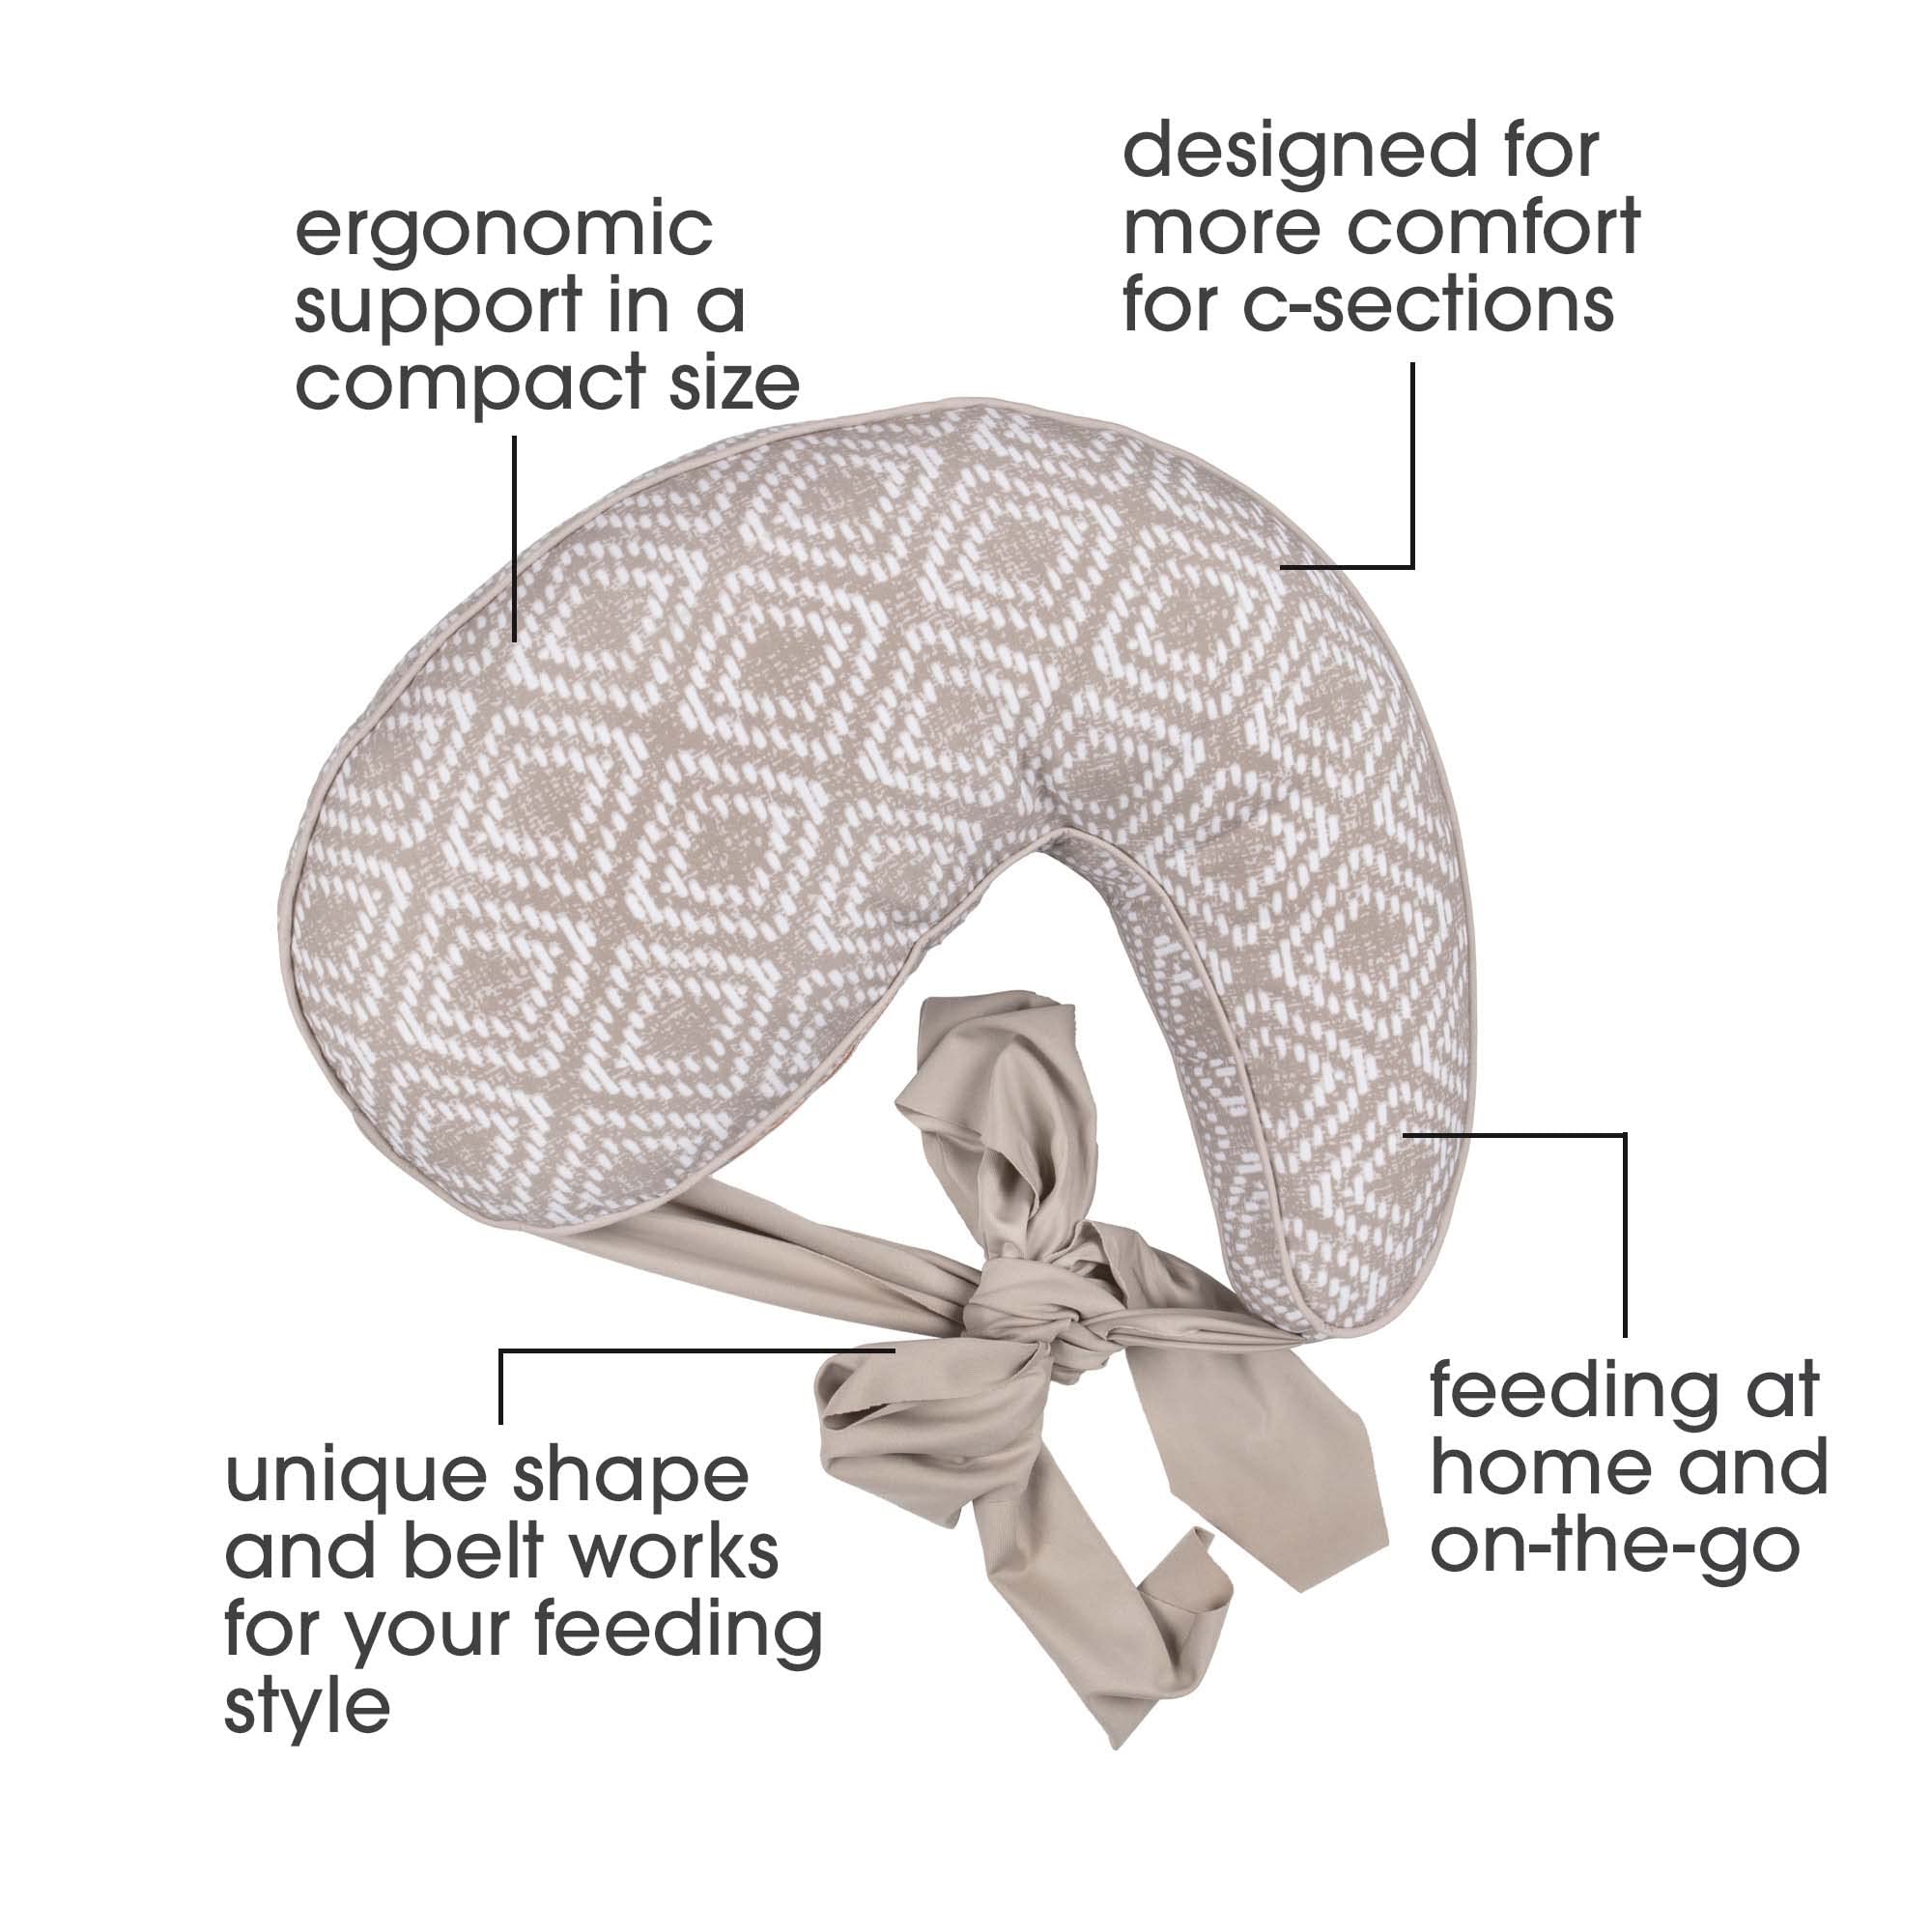 Boppy Anywhere Support Nursing Pillow, Latte Rattan with Stretch Belt that Stores Small, Breastfeeding and Bottle-feeding Support at Home and for Travel, Plus Sized to Petite, Machine Washable